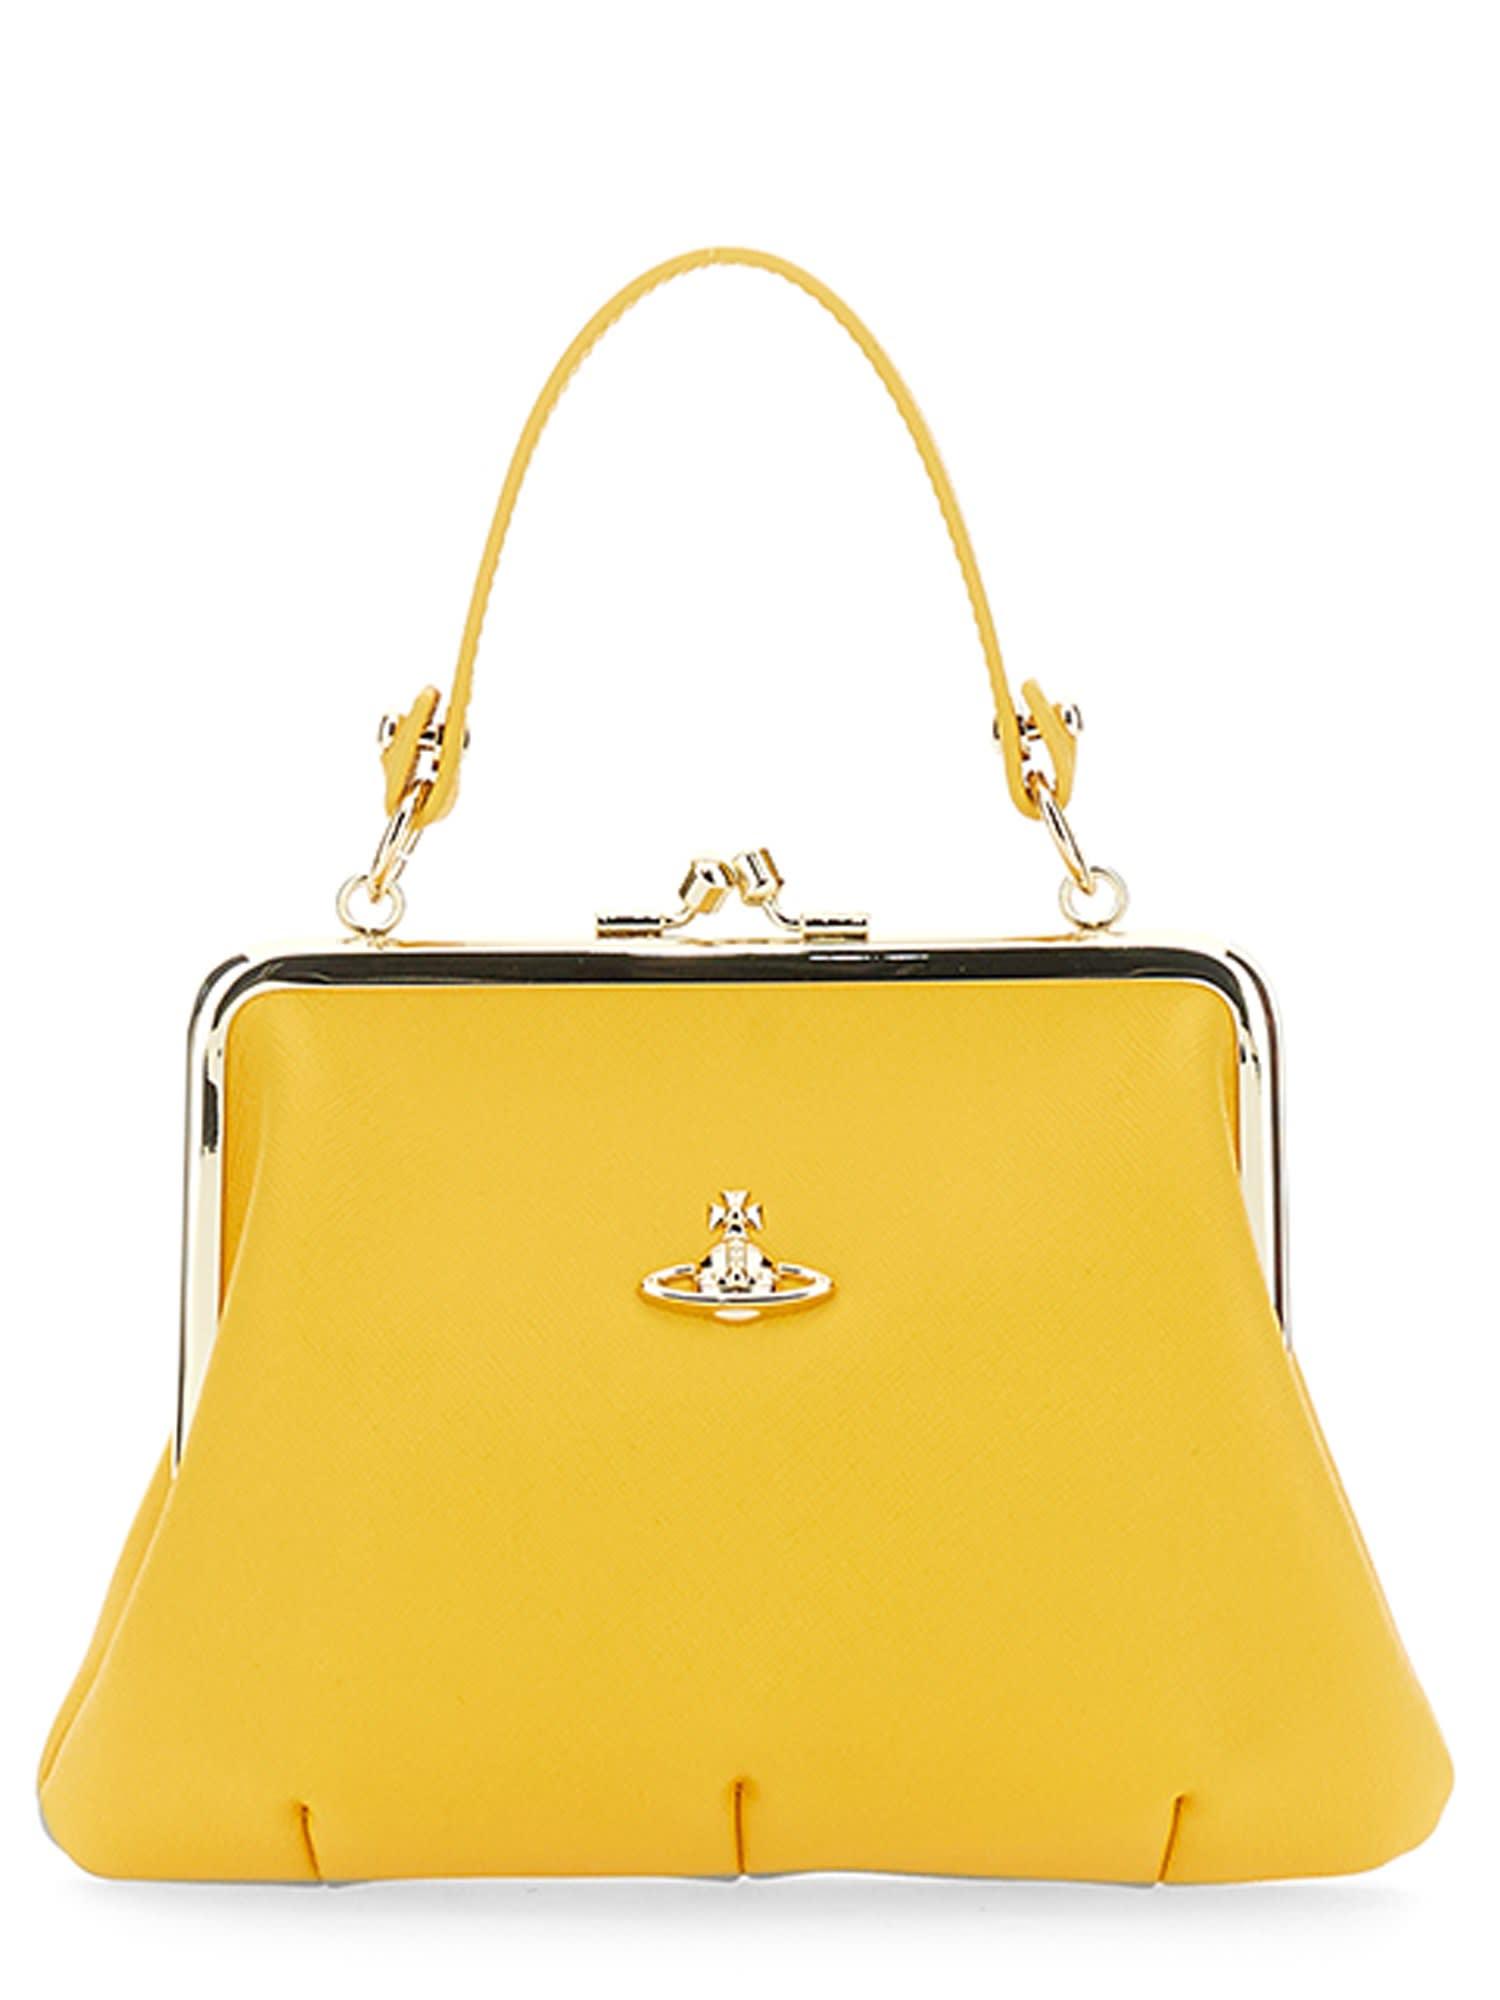 Vivienne Westwood Granny Bag With Chain in Yellow | Lyst